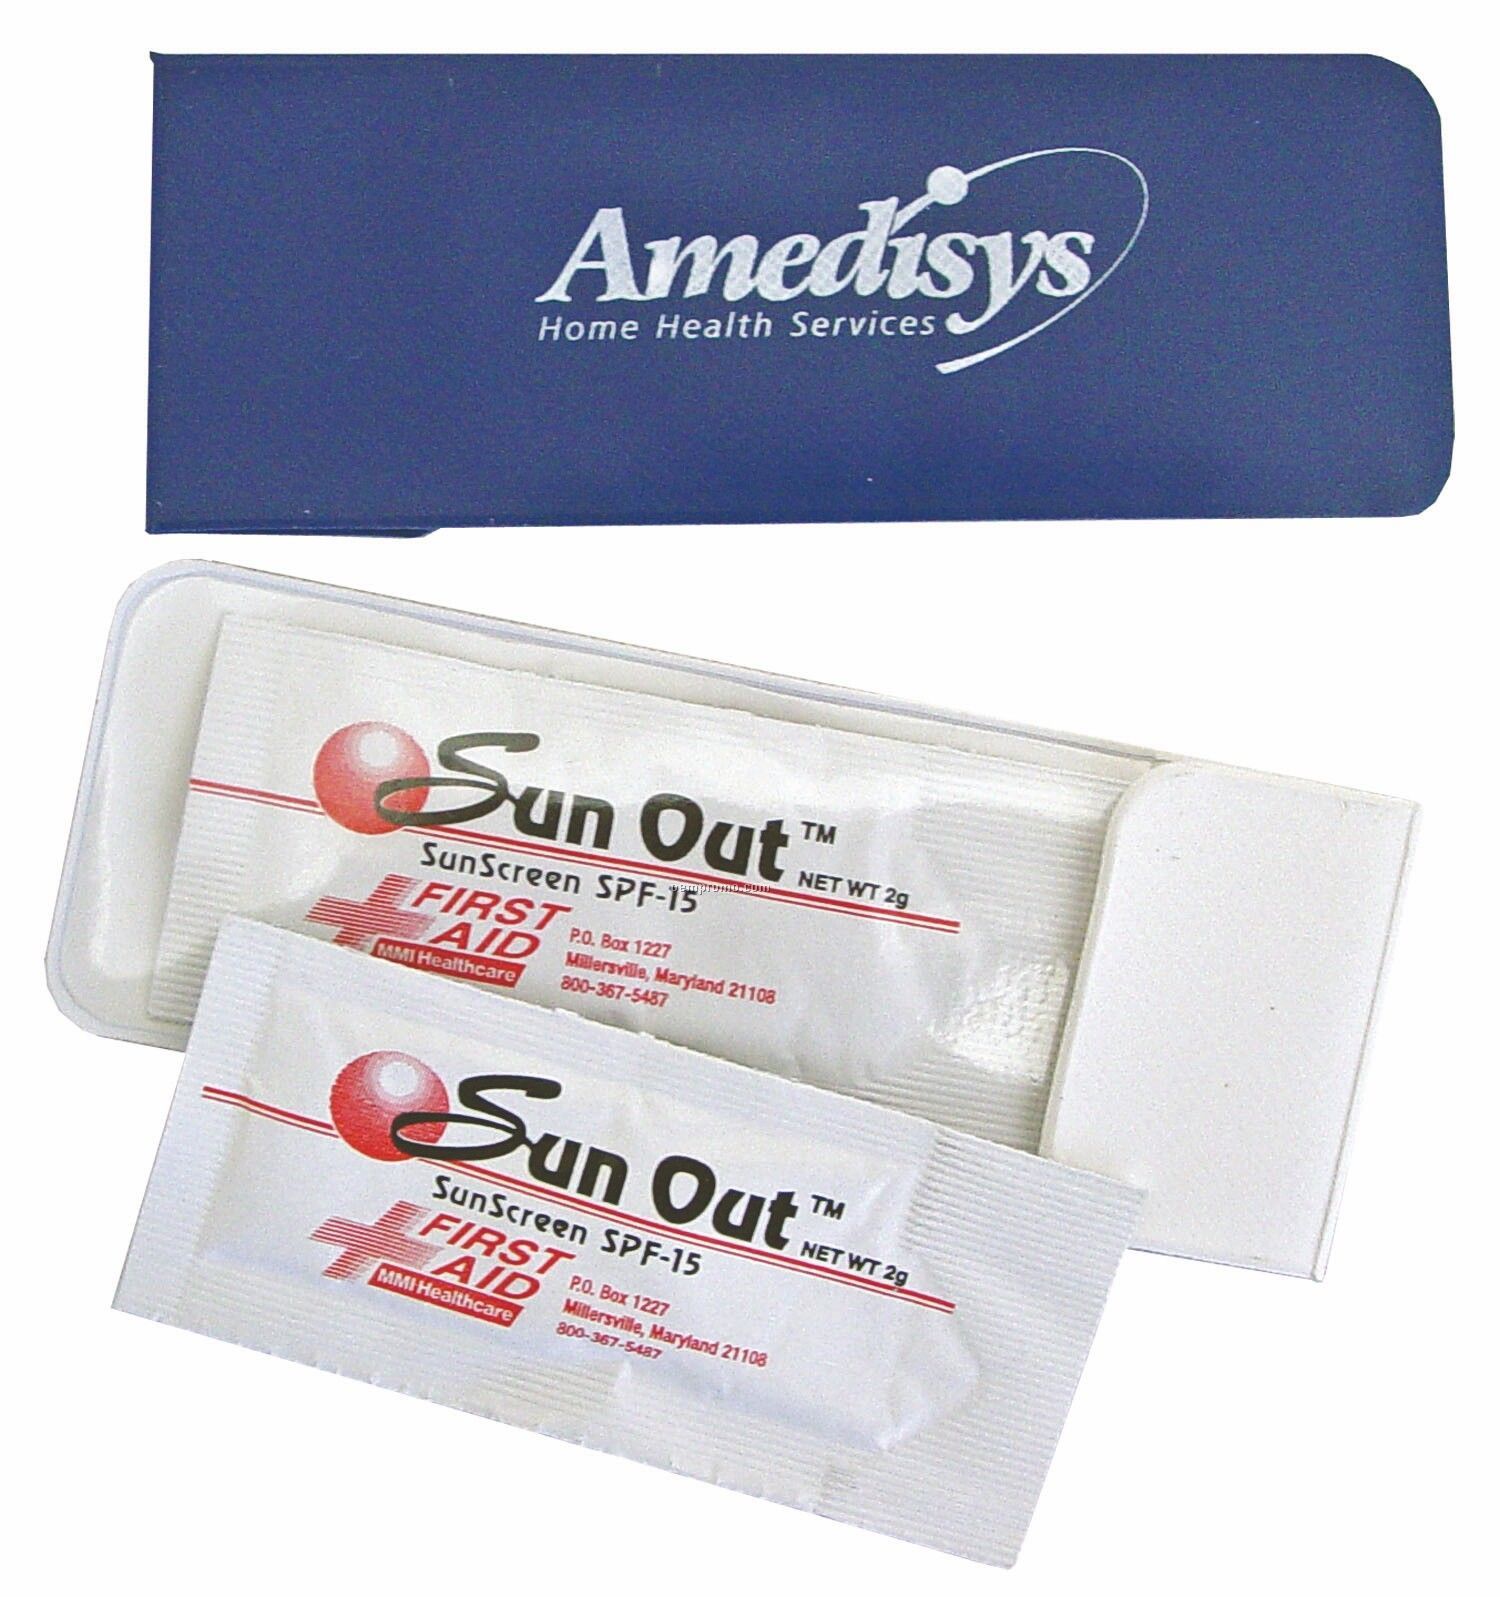 Moisturizing Sunscreen Packets In Vinyl Case - Imprinted